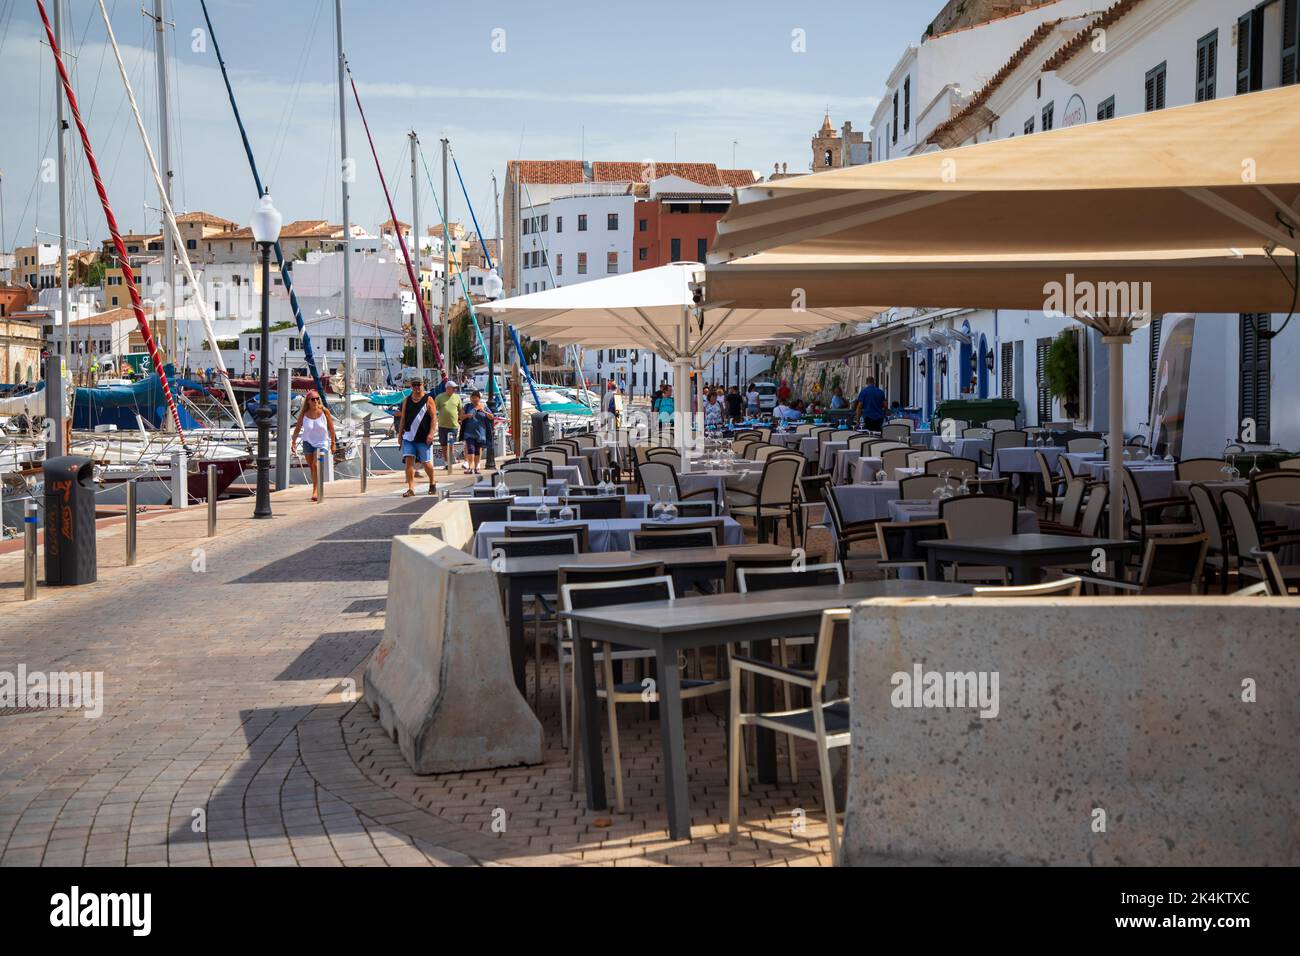 Ciutadella, Spain - September 5th, 2022:The port of Ciutadella can accommodate 175 vessels and has a promanade with seafood restaurants Stock Photo